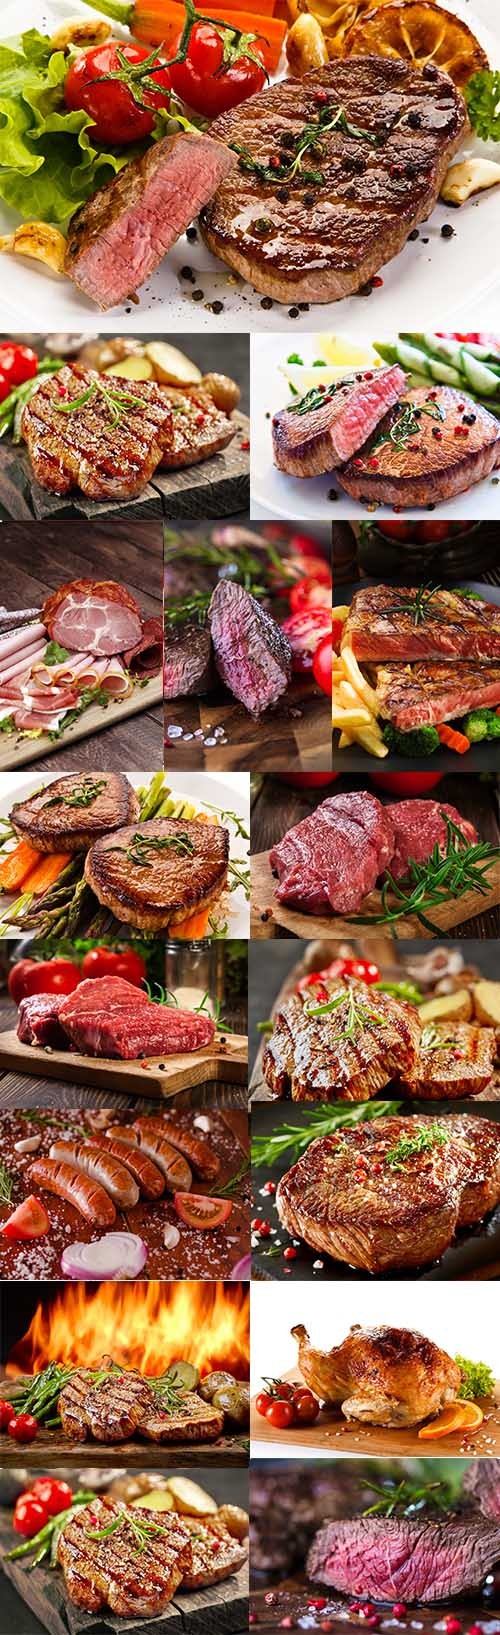 Grilled fillet steaks, grilled sausages and vegetables, tomato and onion